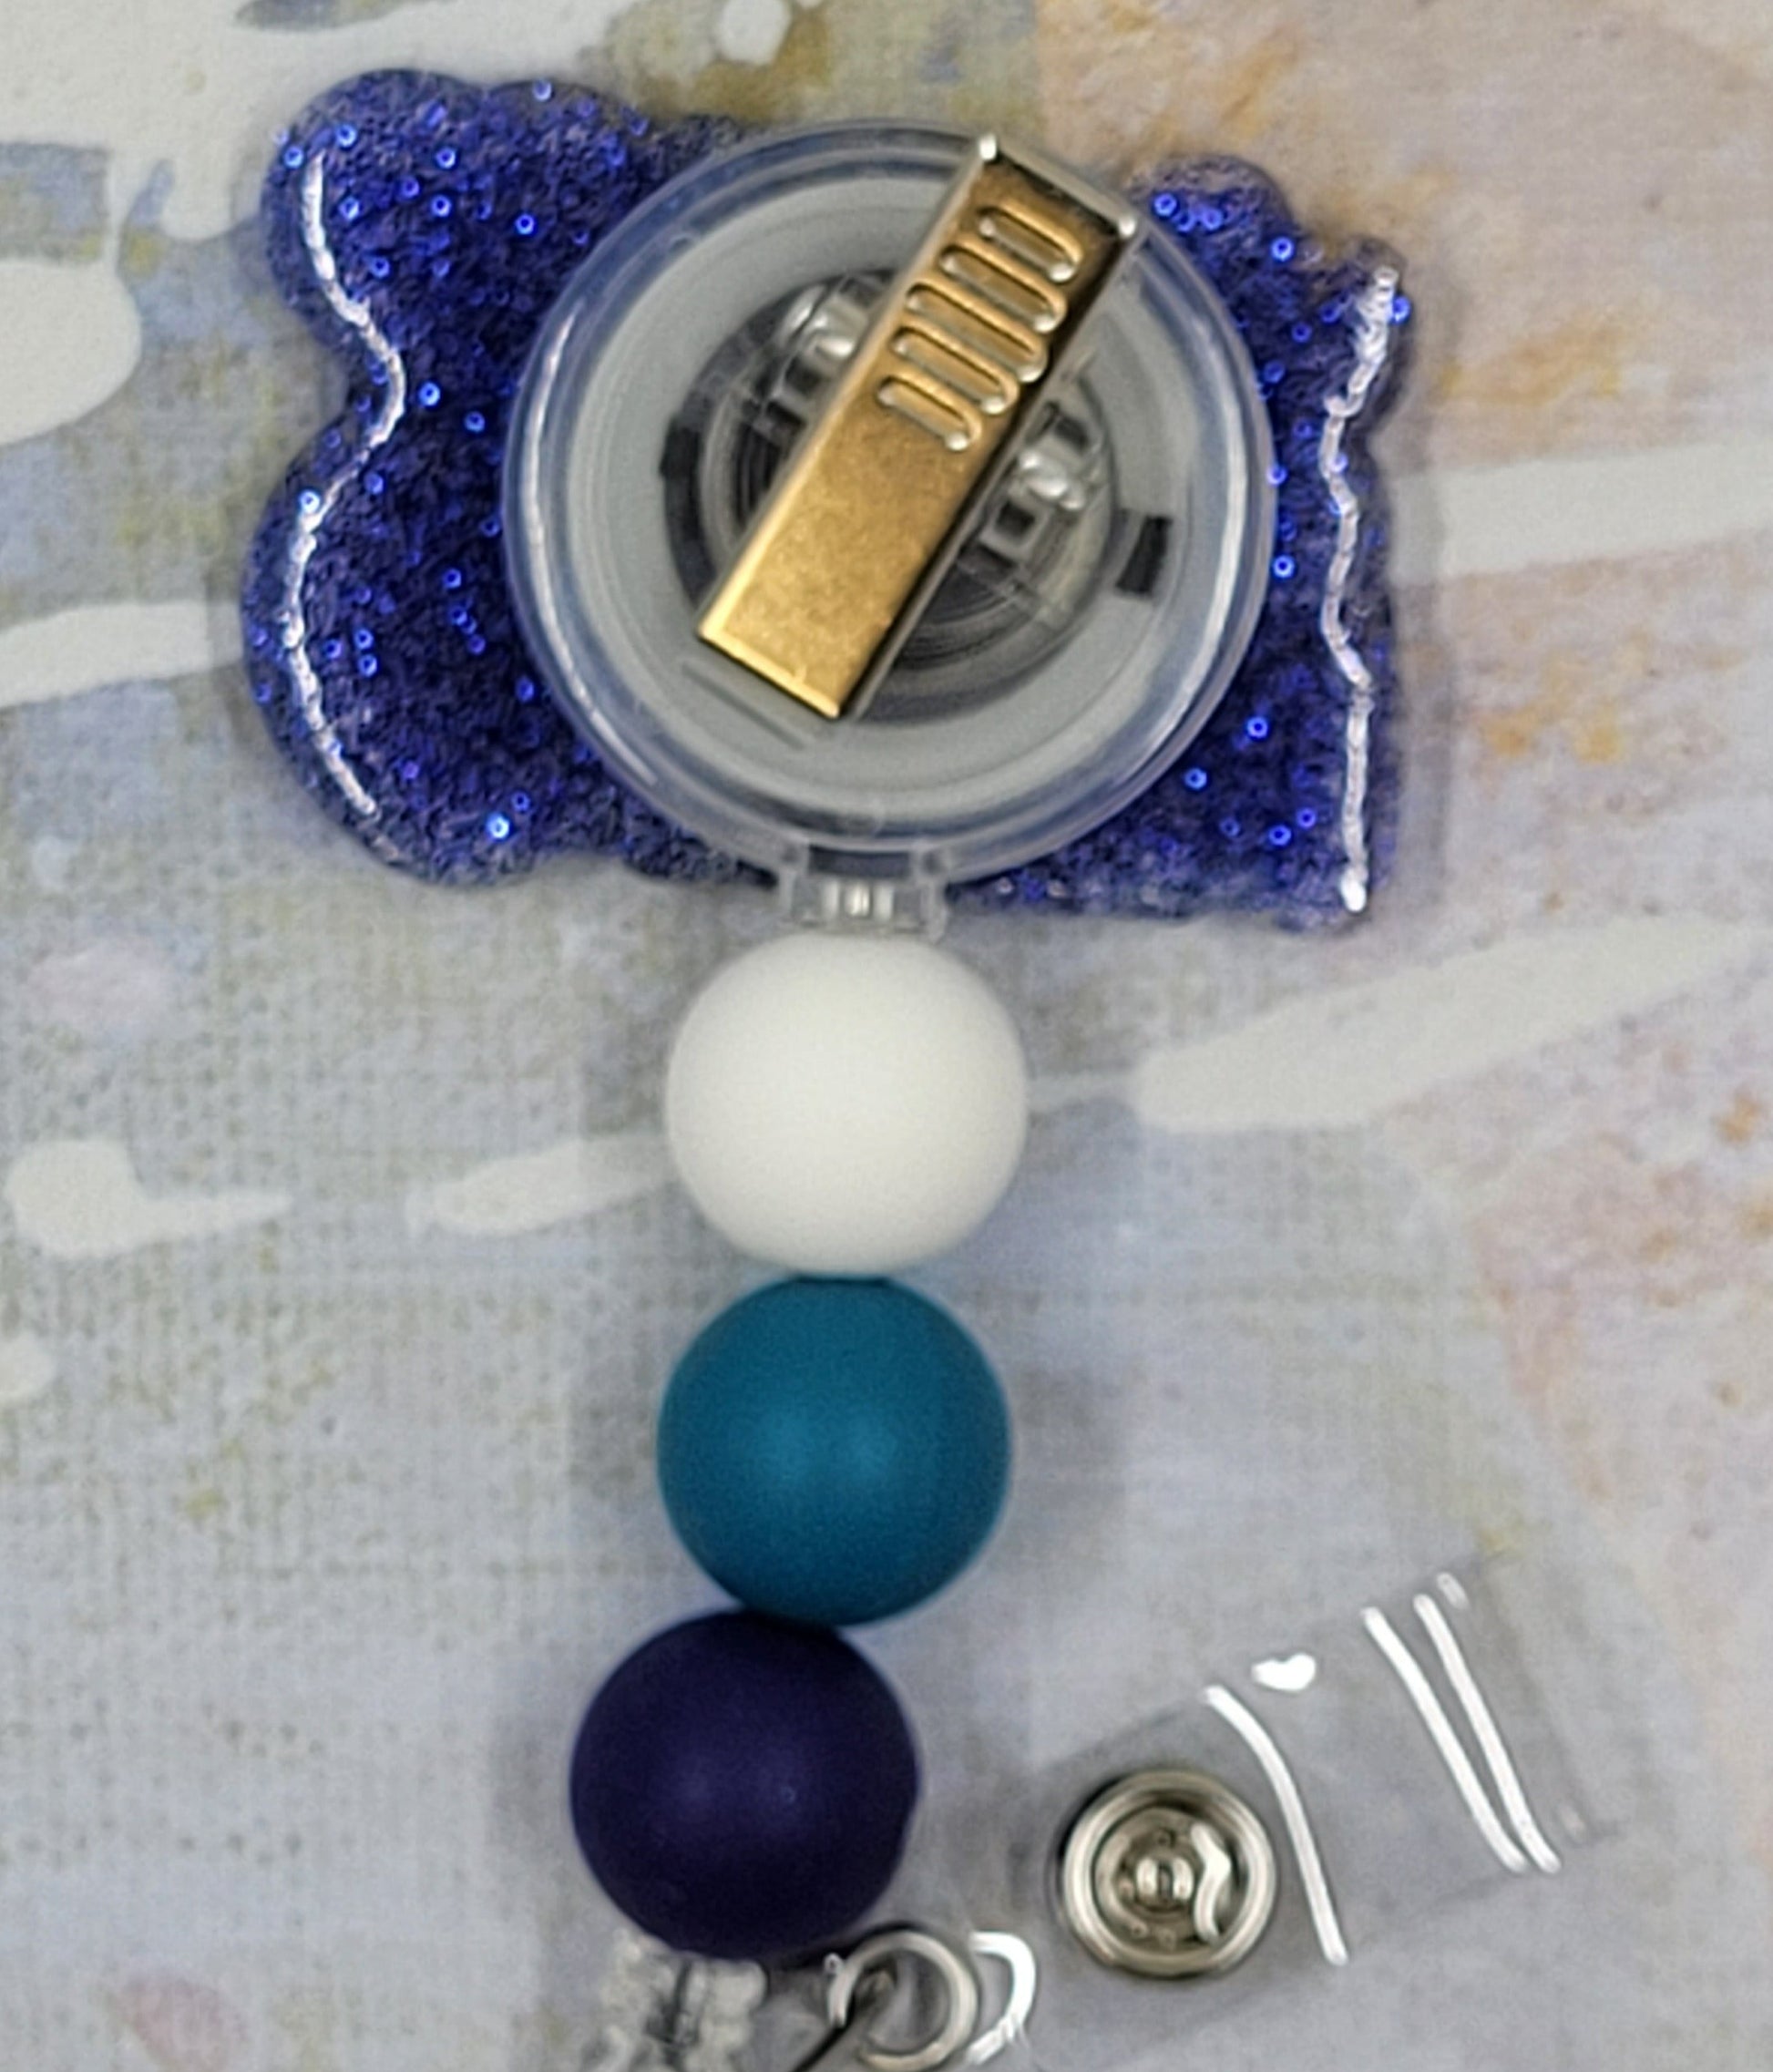 You Matter. You do and everything about you matters. This badge reel proudly promotes that statement. In blues and purples with a dark blue glitter base, this badge reel is a looker. 3 color coordinated silicone beads finish the look.